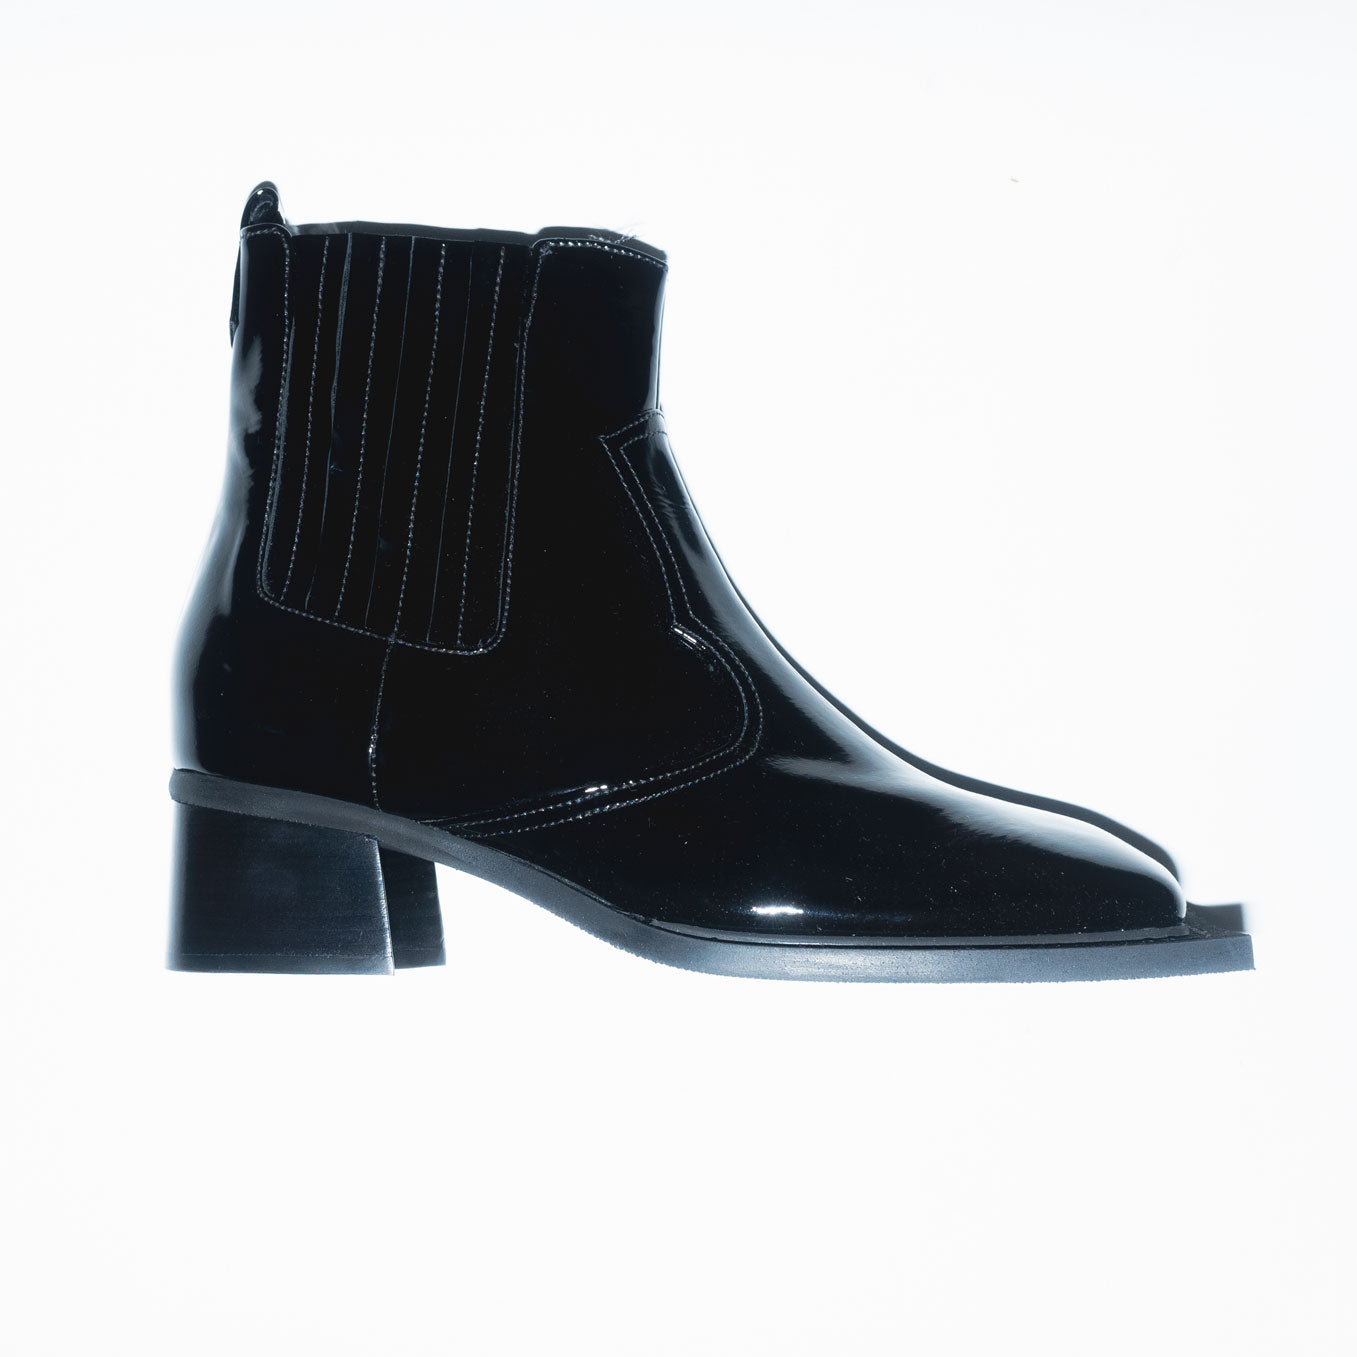 Runway Howler Ankle Boots in Black Patent Leather